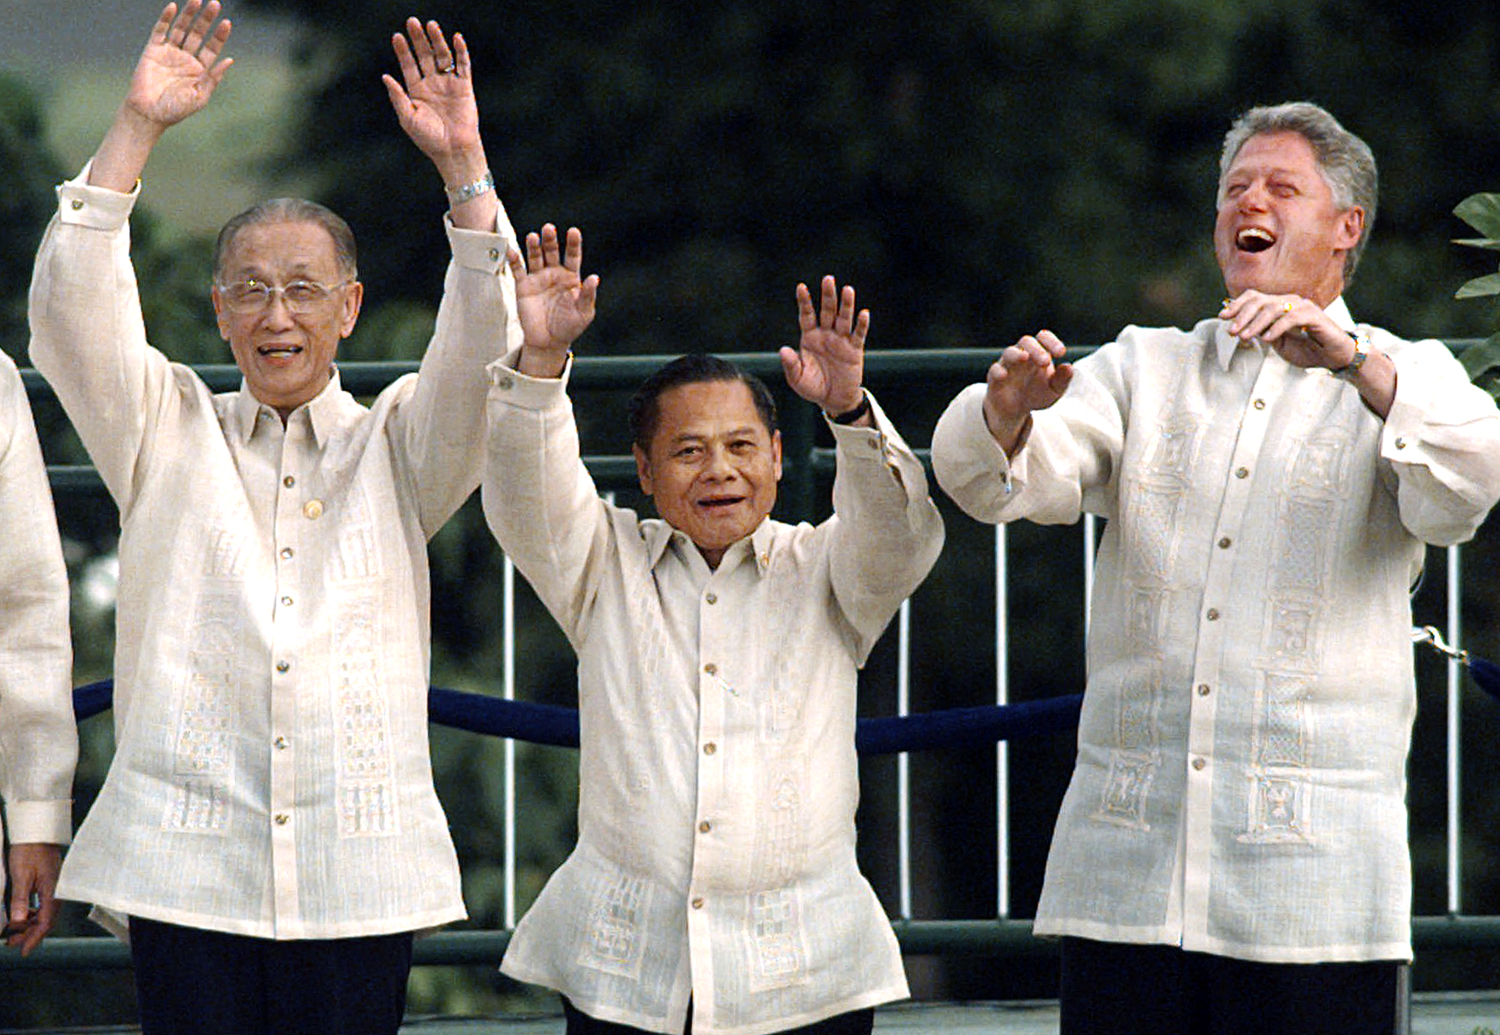 1996, Subic Bay, the Philippines: US President Bill Clinton, right, wearing a traditional “barong tagalog”, does “the wave” with Koo Chen-fu of Taiwan, left, and Thai Prime Minister Banharn Silpa-archa. Photo: AP
